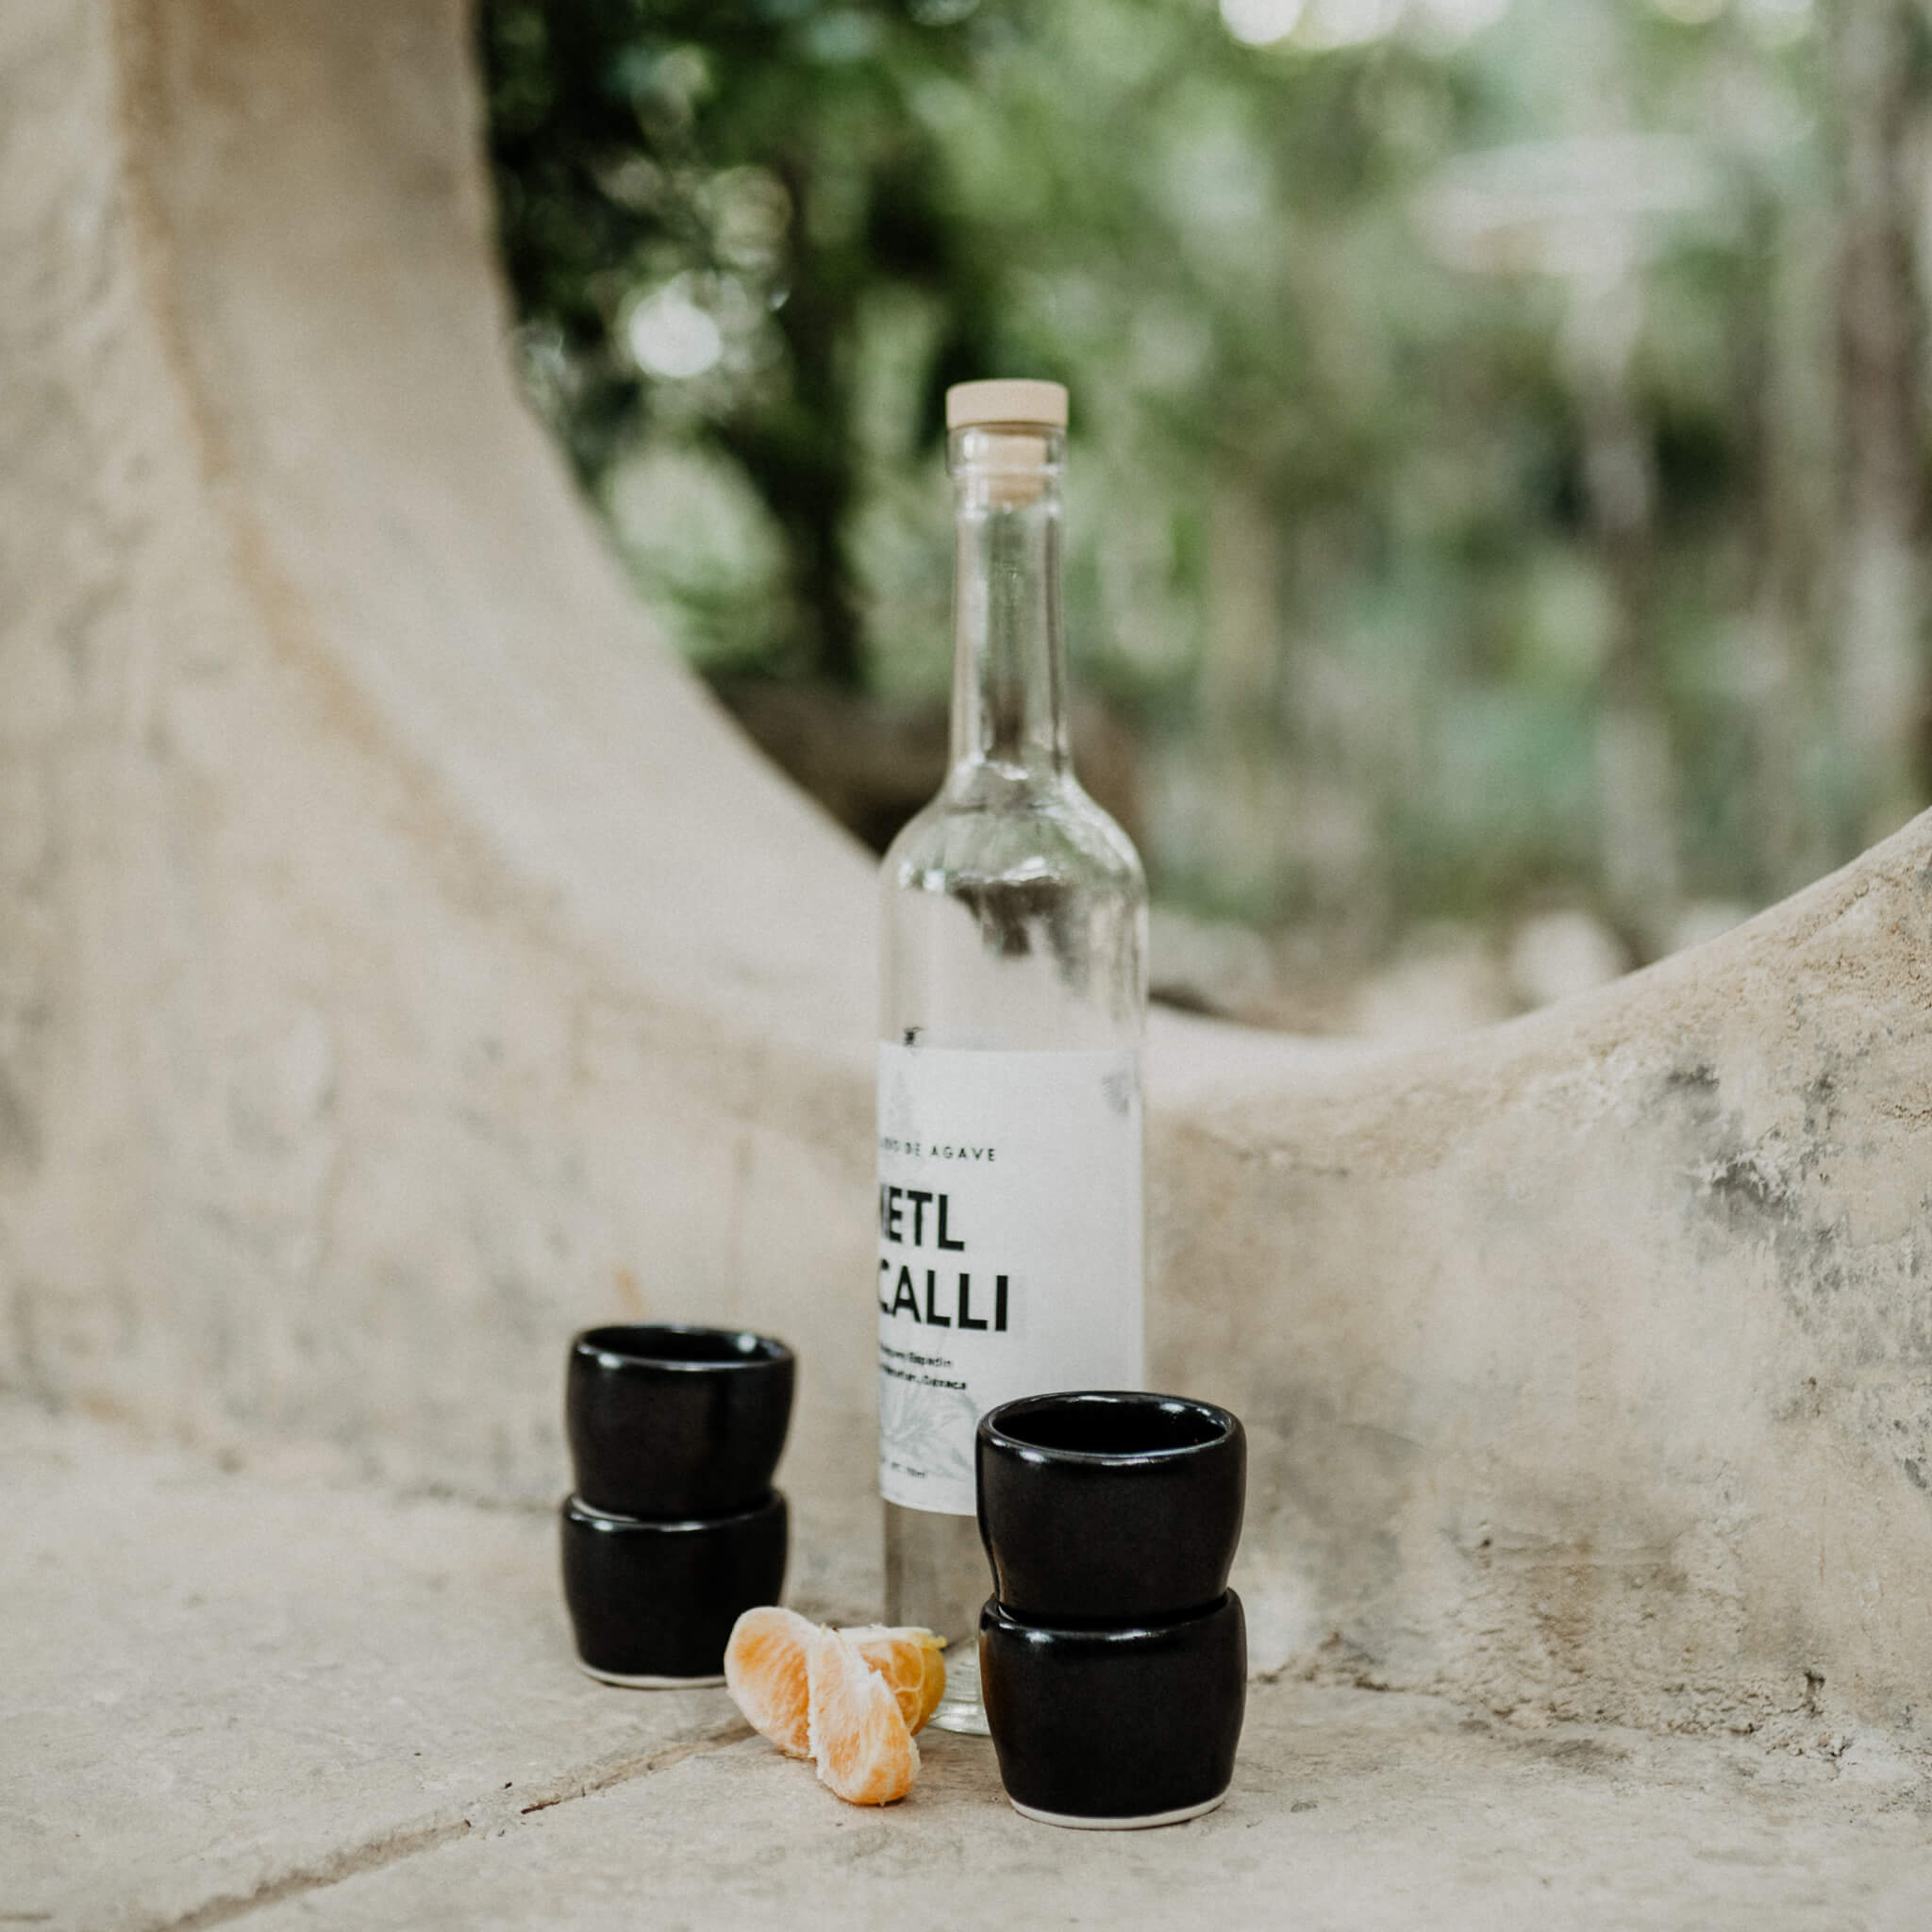 A set of black clay mezcal drinking cups with mezcal and orange slices.